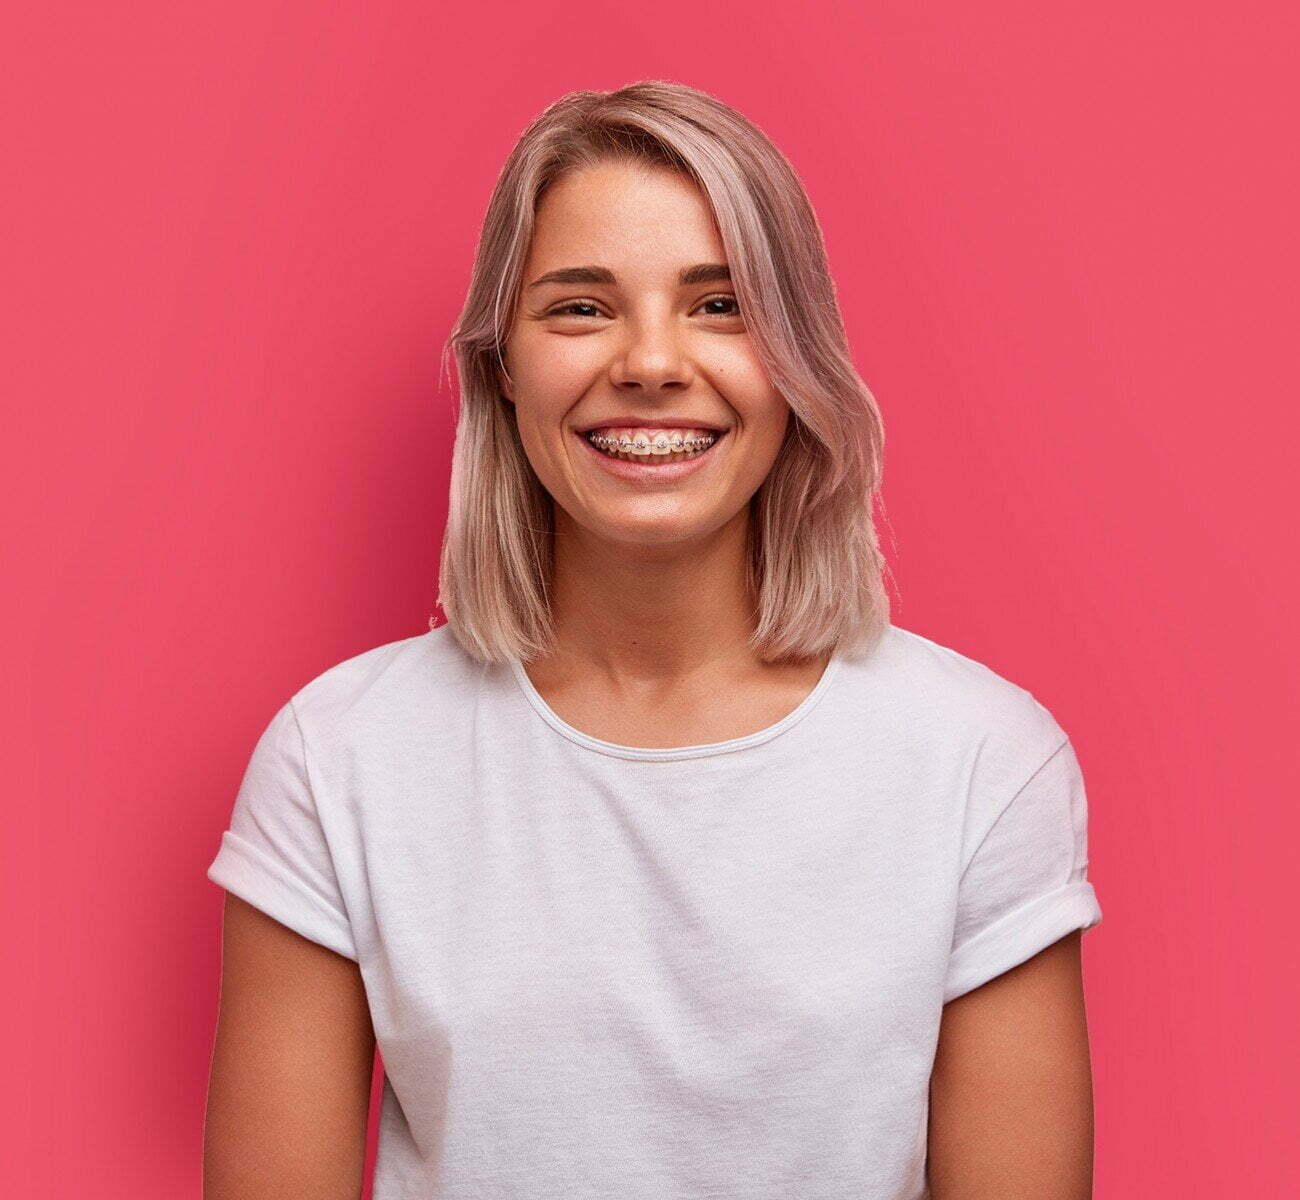 Smiling young woman wearing orthodontic braces on a pink background